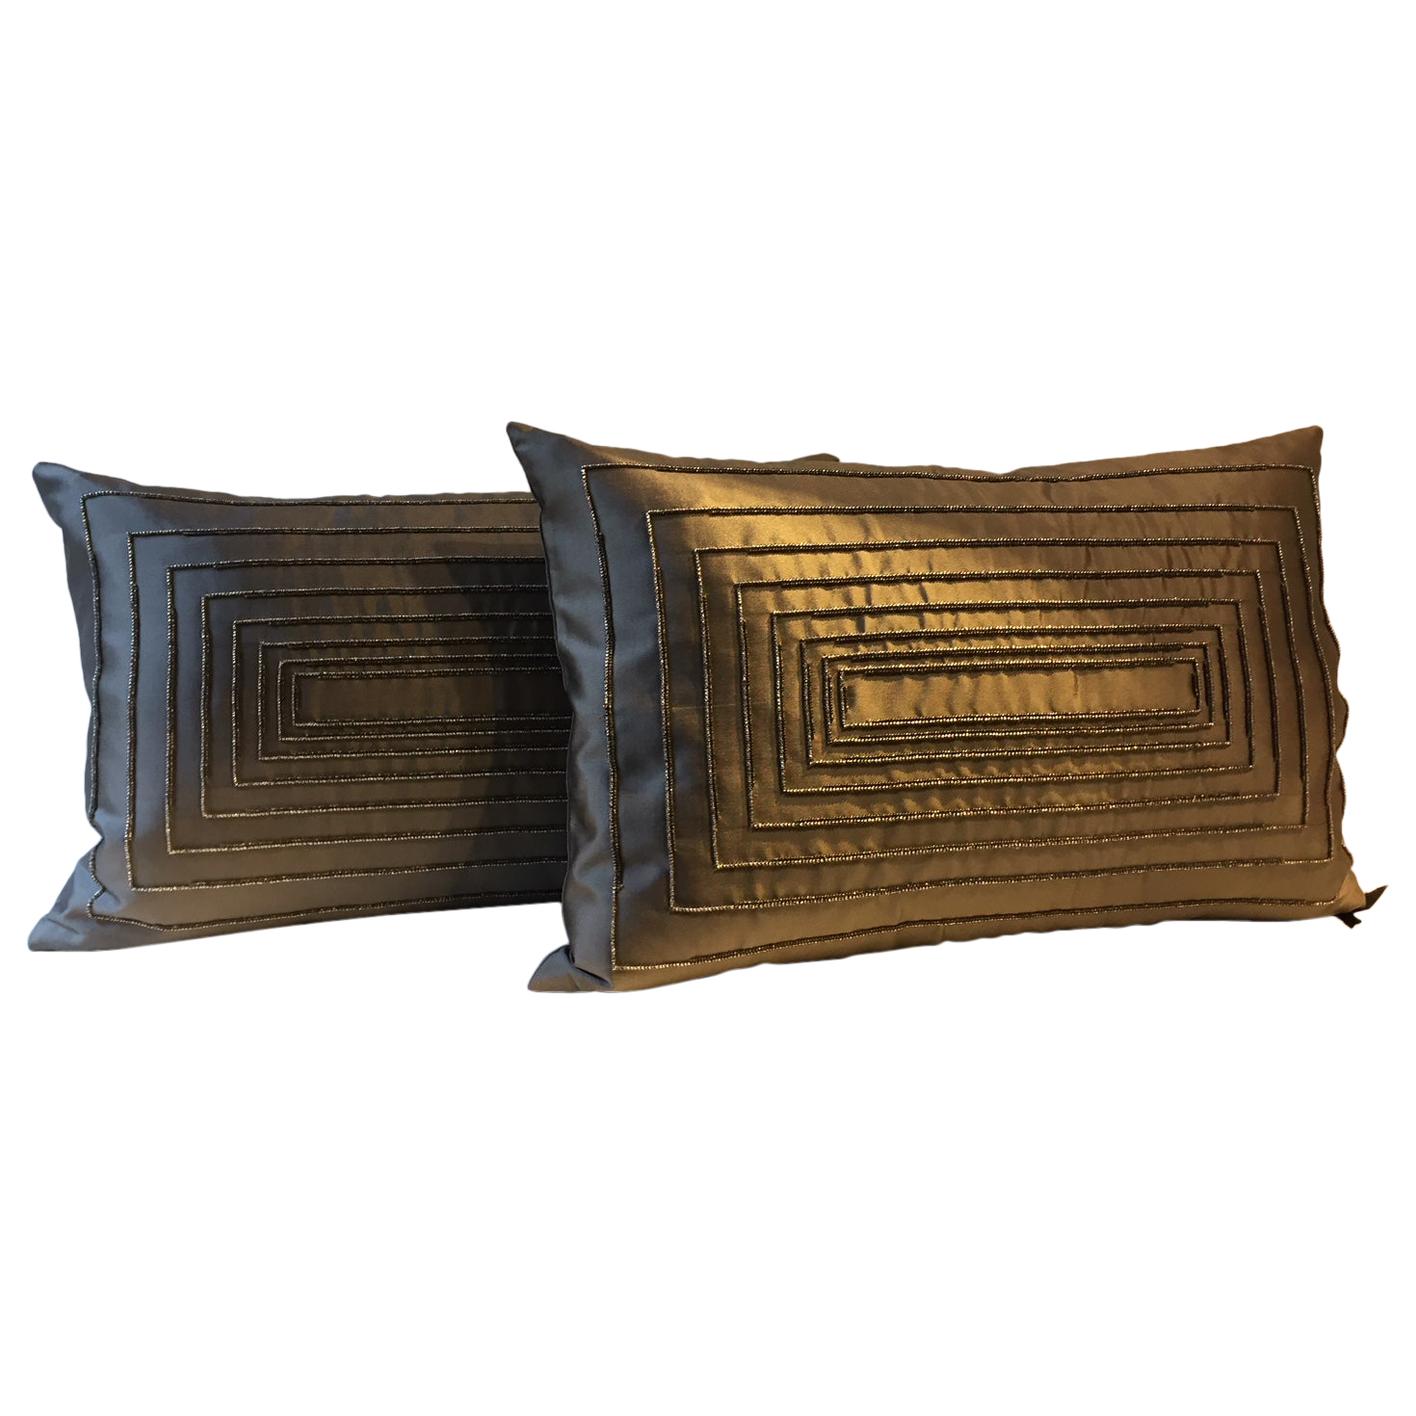 Contemporary Design Hand Embroidered Cushions in Silk Color Peppercorn Brown For Sale